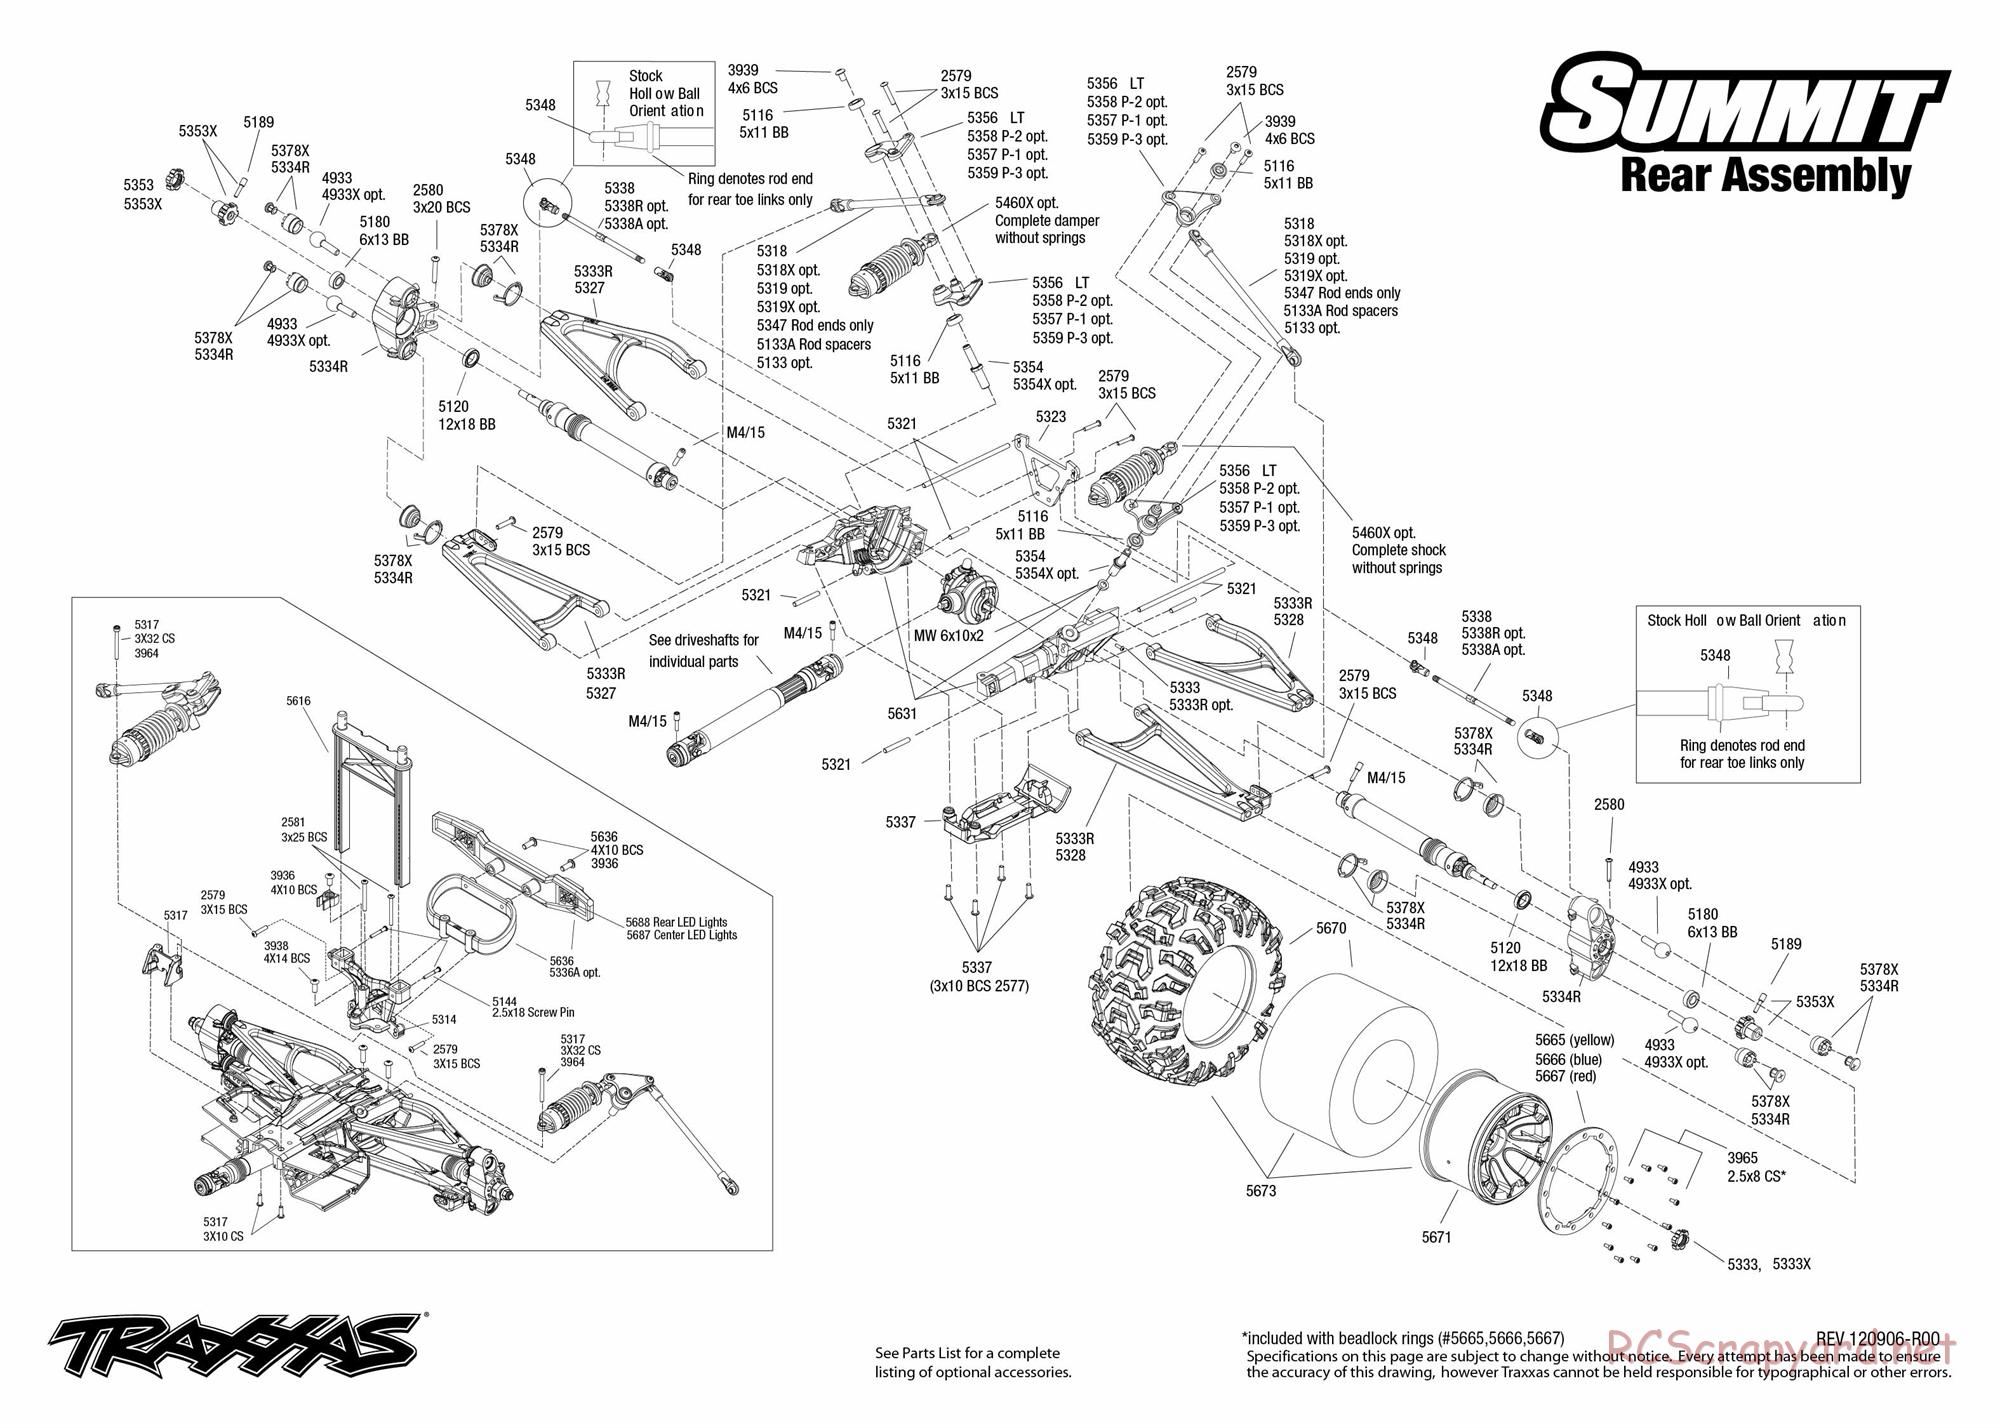 Traxxas - Summit LiPo (2012) - Exploded Views - Page 4